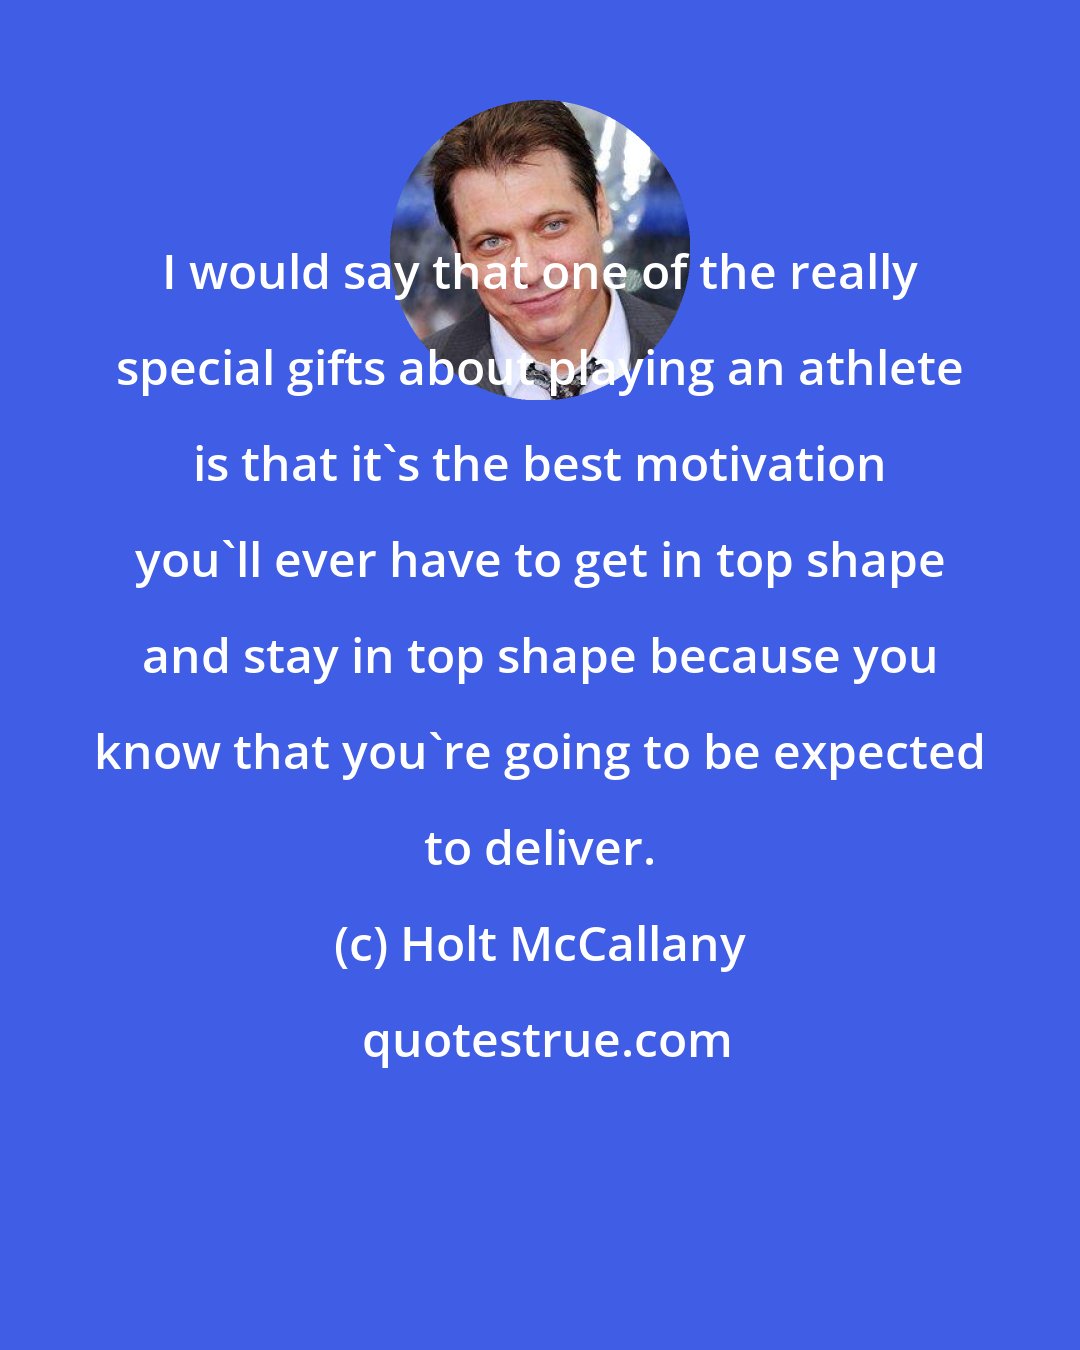 Holt McCallany: I would say that one of the really special gifts about playing an athlete is that it's the best motivation you'll ever have to get in top shape and stay in top shape because you know that you're going to be expected to deliver.